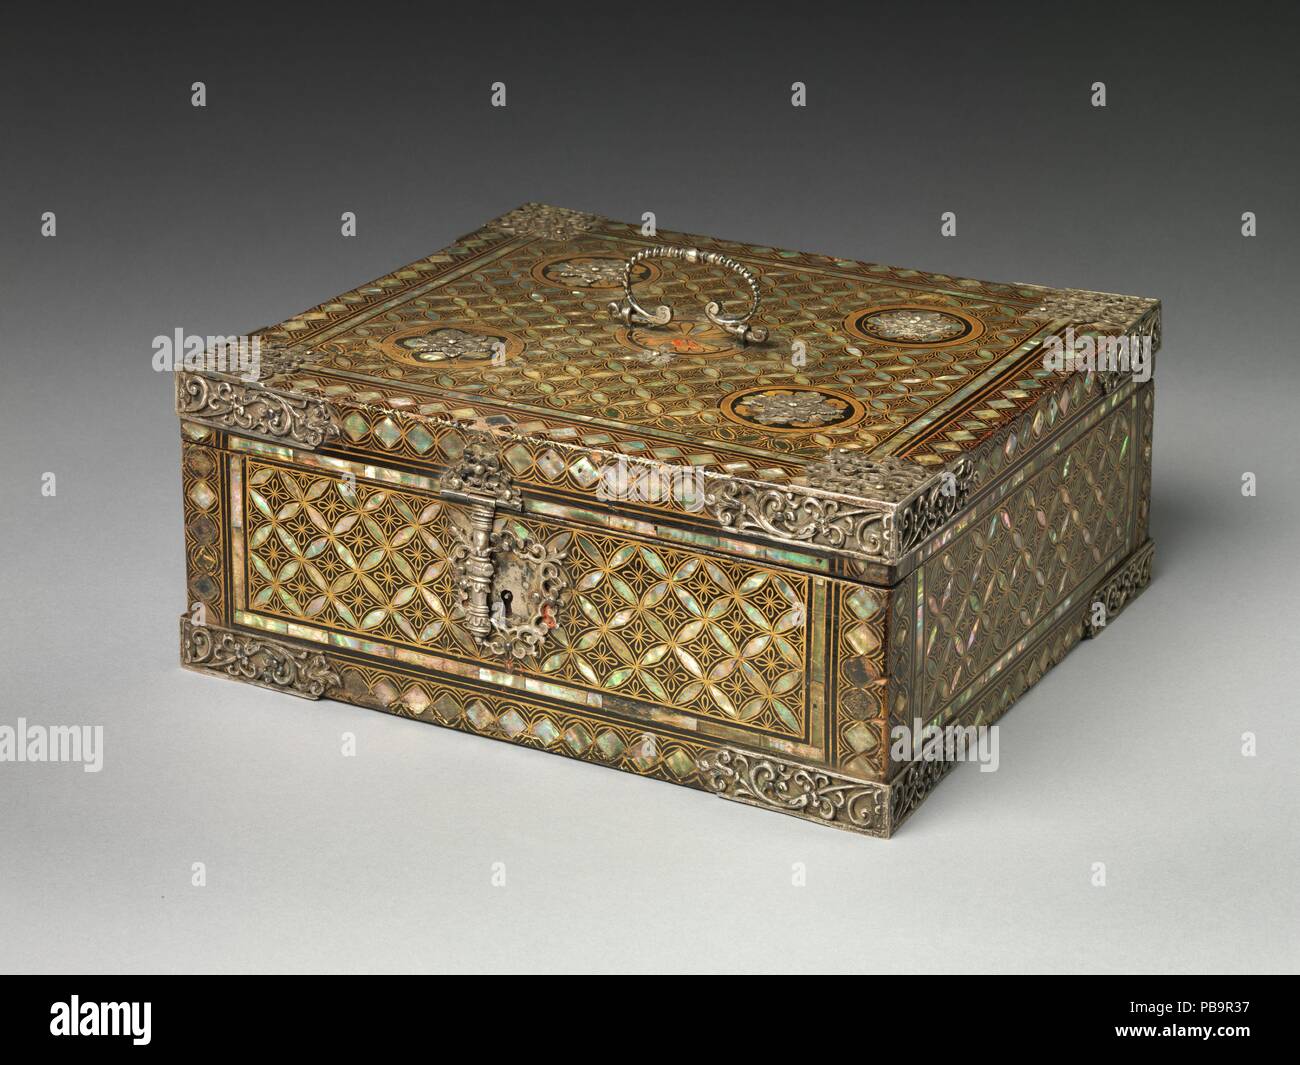 Storage Box in Nanban (Southern Barbarian) Style. Culture: Japan. Dimensions: H. 5 1/2 (14 cm); W. 12 5/8 in. (32.1 cm); D. 11 3/8 in. (28.9 cm). Date: 16th century. Museum: Metropolitan Museum of Art, New York, USA. Stock Photo